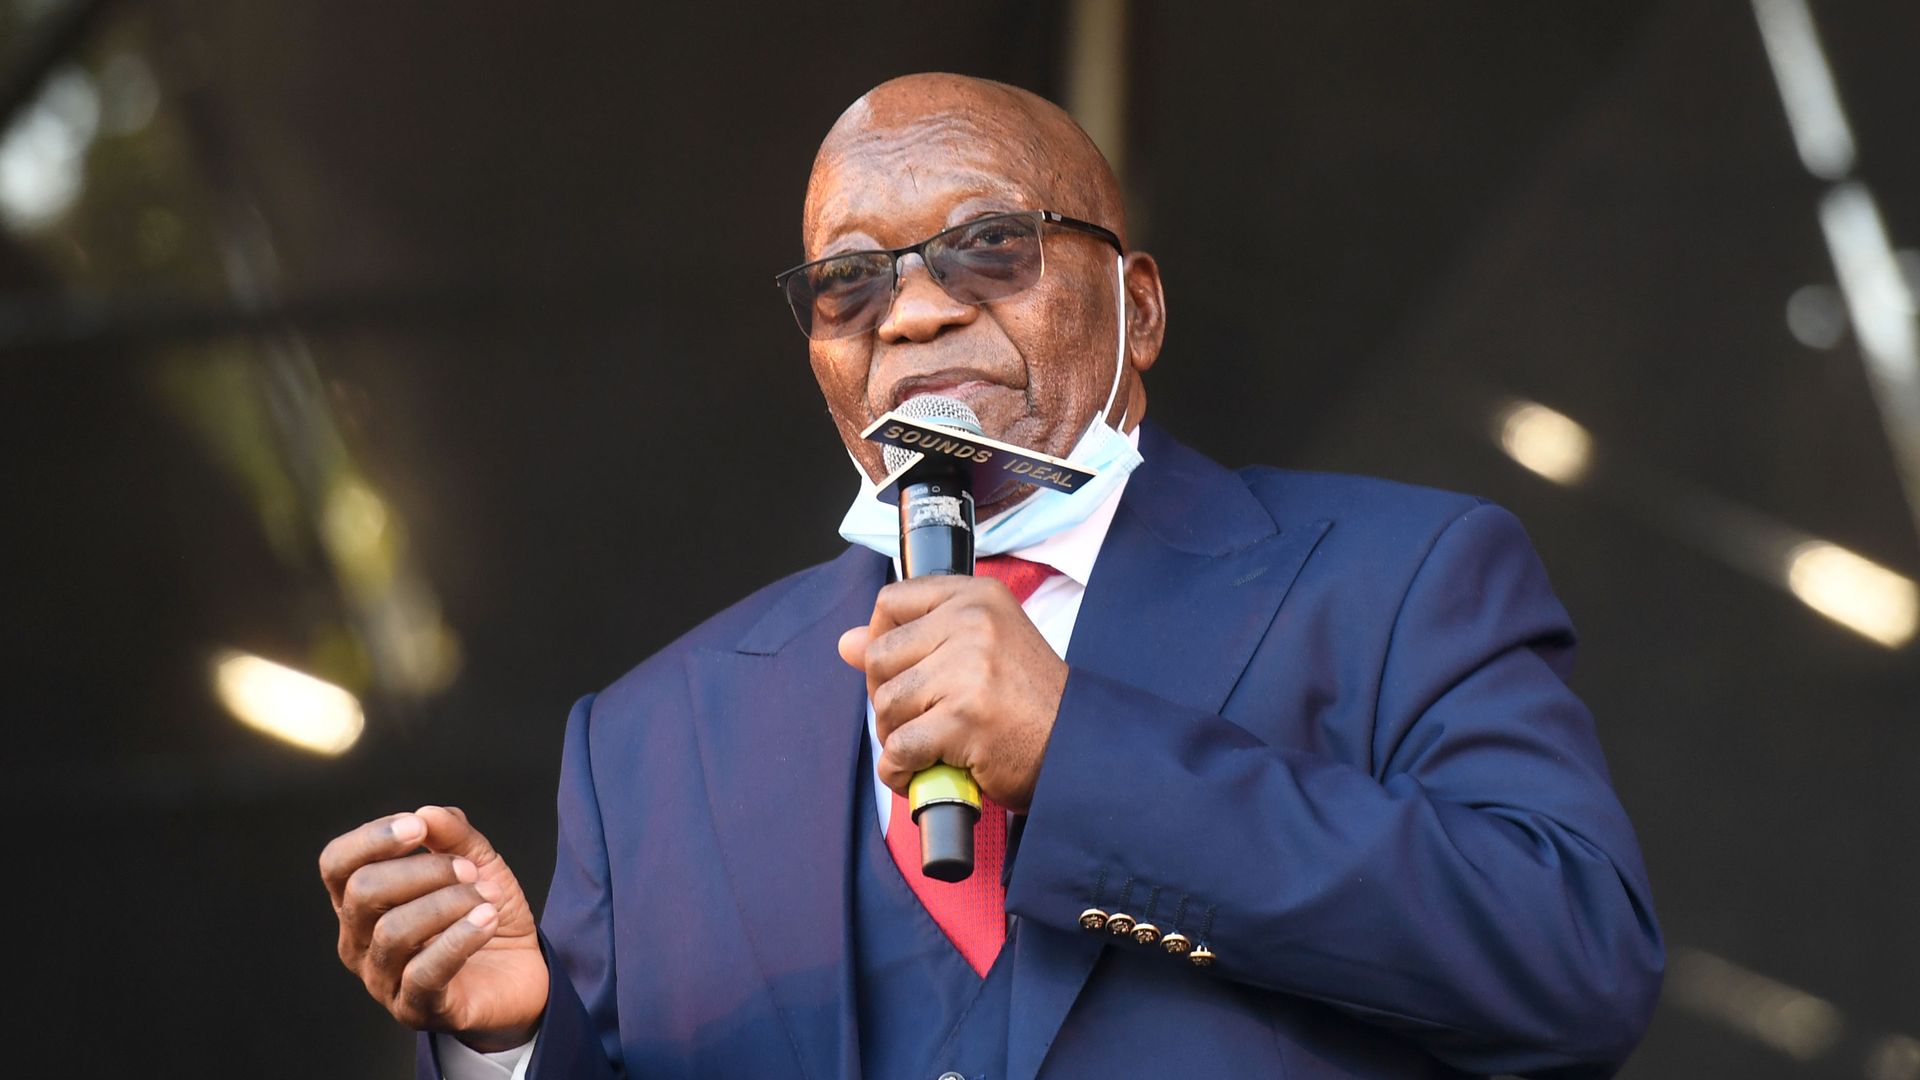 Former President Jacob Zuma addresses ANC supporters outside the Pietermaritzburg High Court on May 26, 2021 in Pietermaritzburg, South Africa.